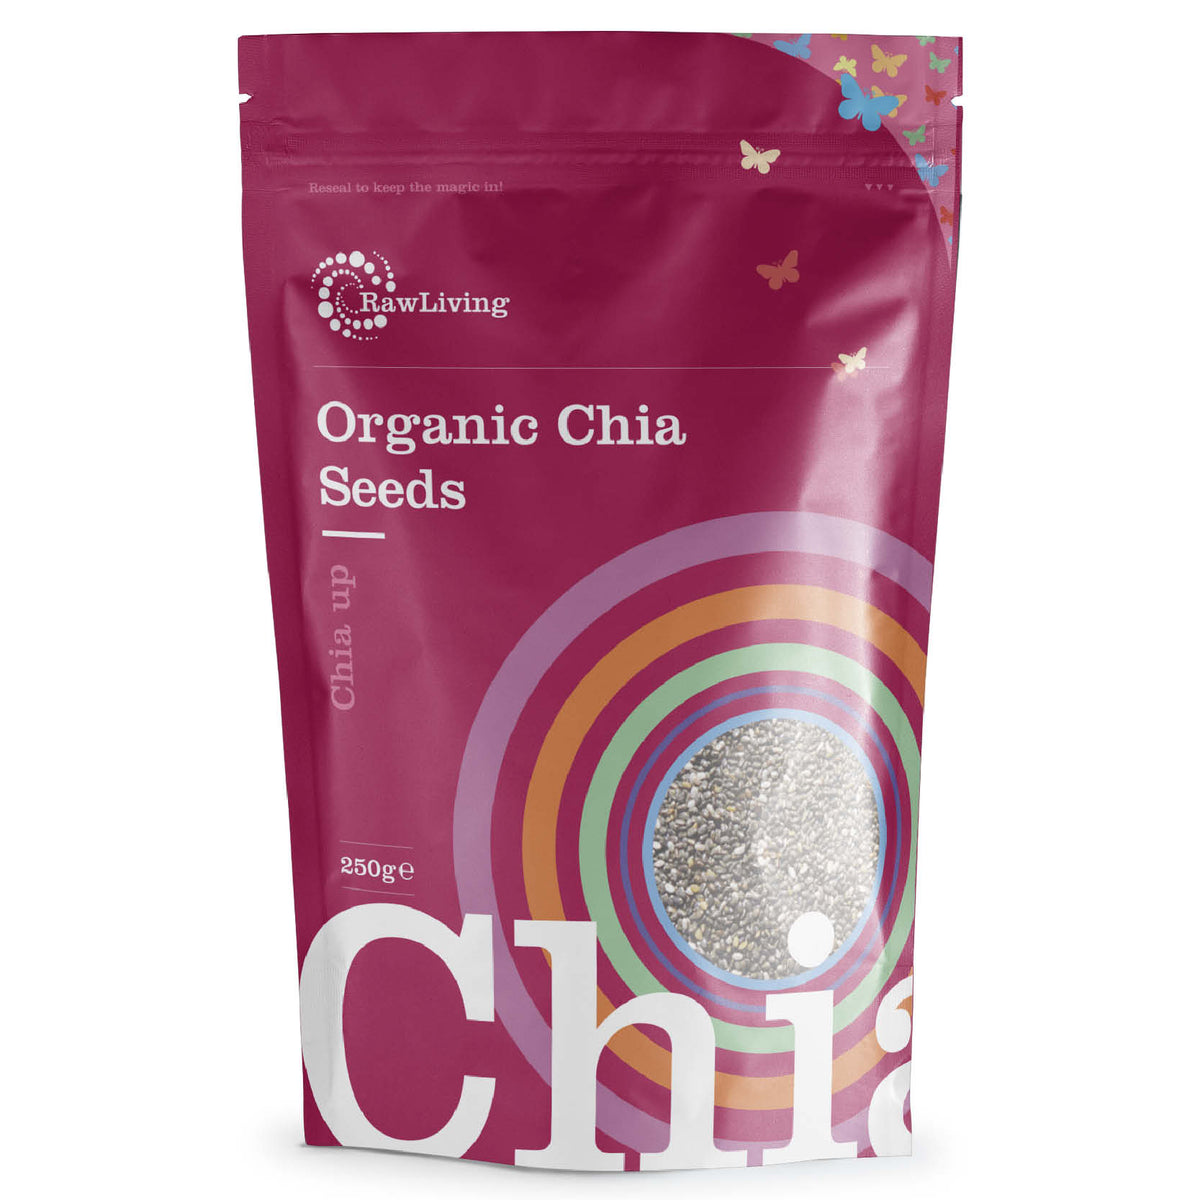 Organic Chia Seeds | Raw Living UK | Raw Foods | Raw Living Organic Chia Seeds: packed with Antioxidants, Chia is one of the most nutritious superfoods! Chia is full of Fibre, Protein, Vitamins &amp; Minerals.